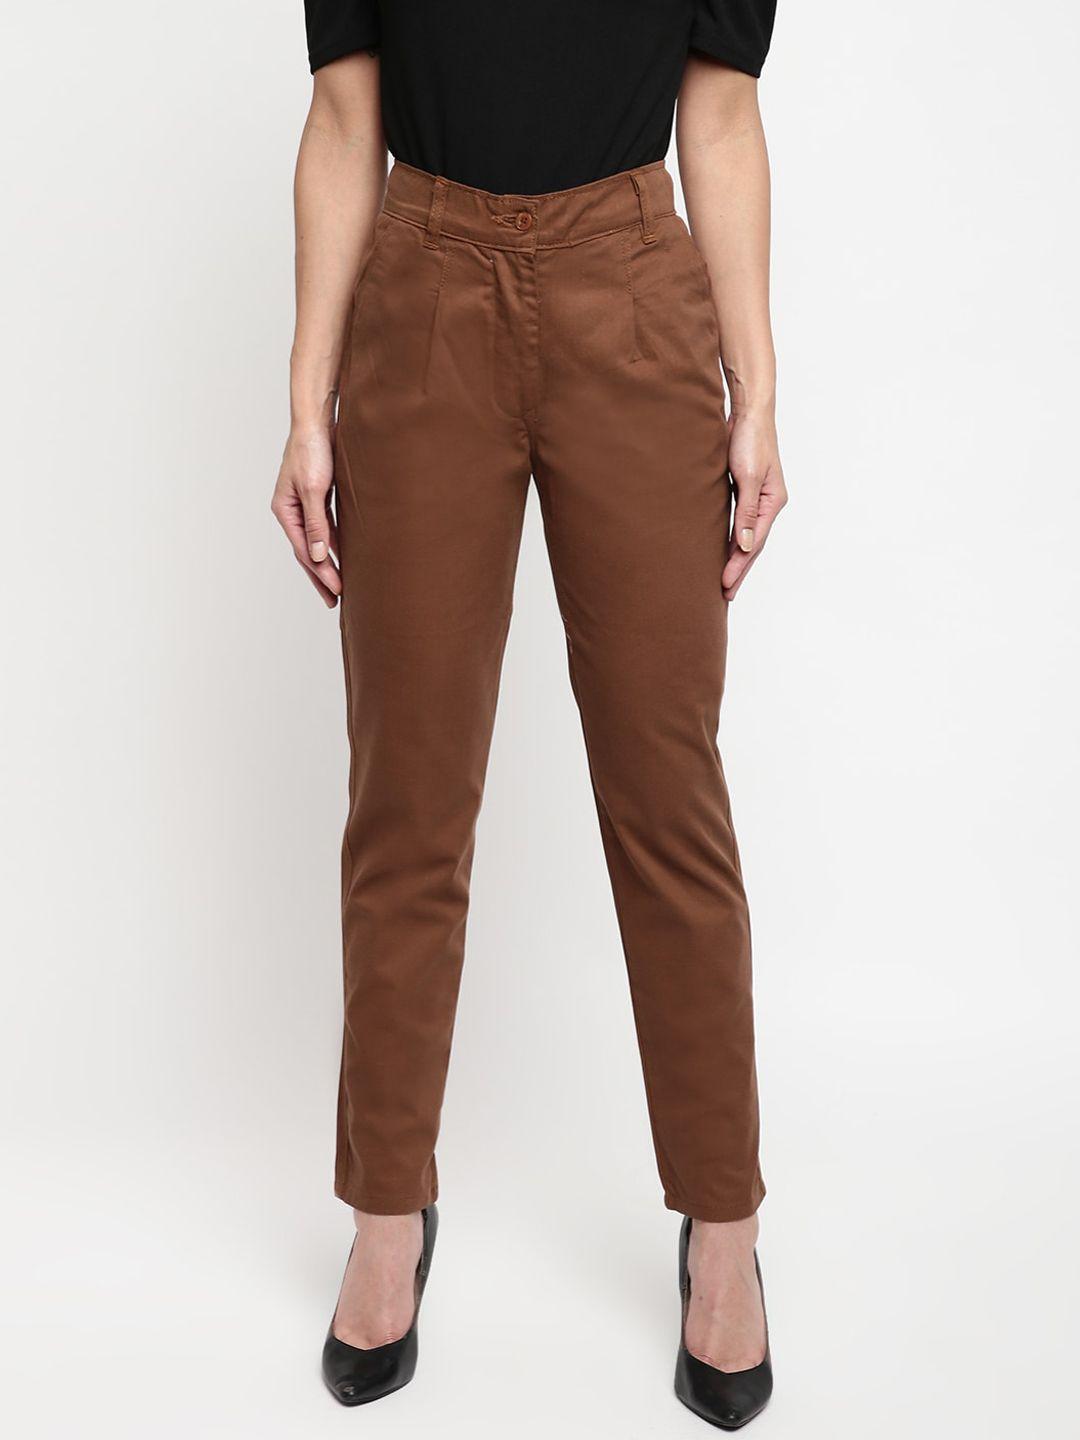 mayra-women-brown-skinny-fit-pleated-cotton-trousers